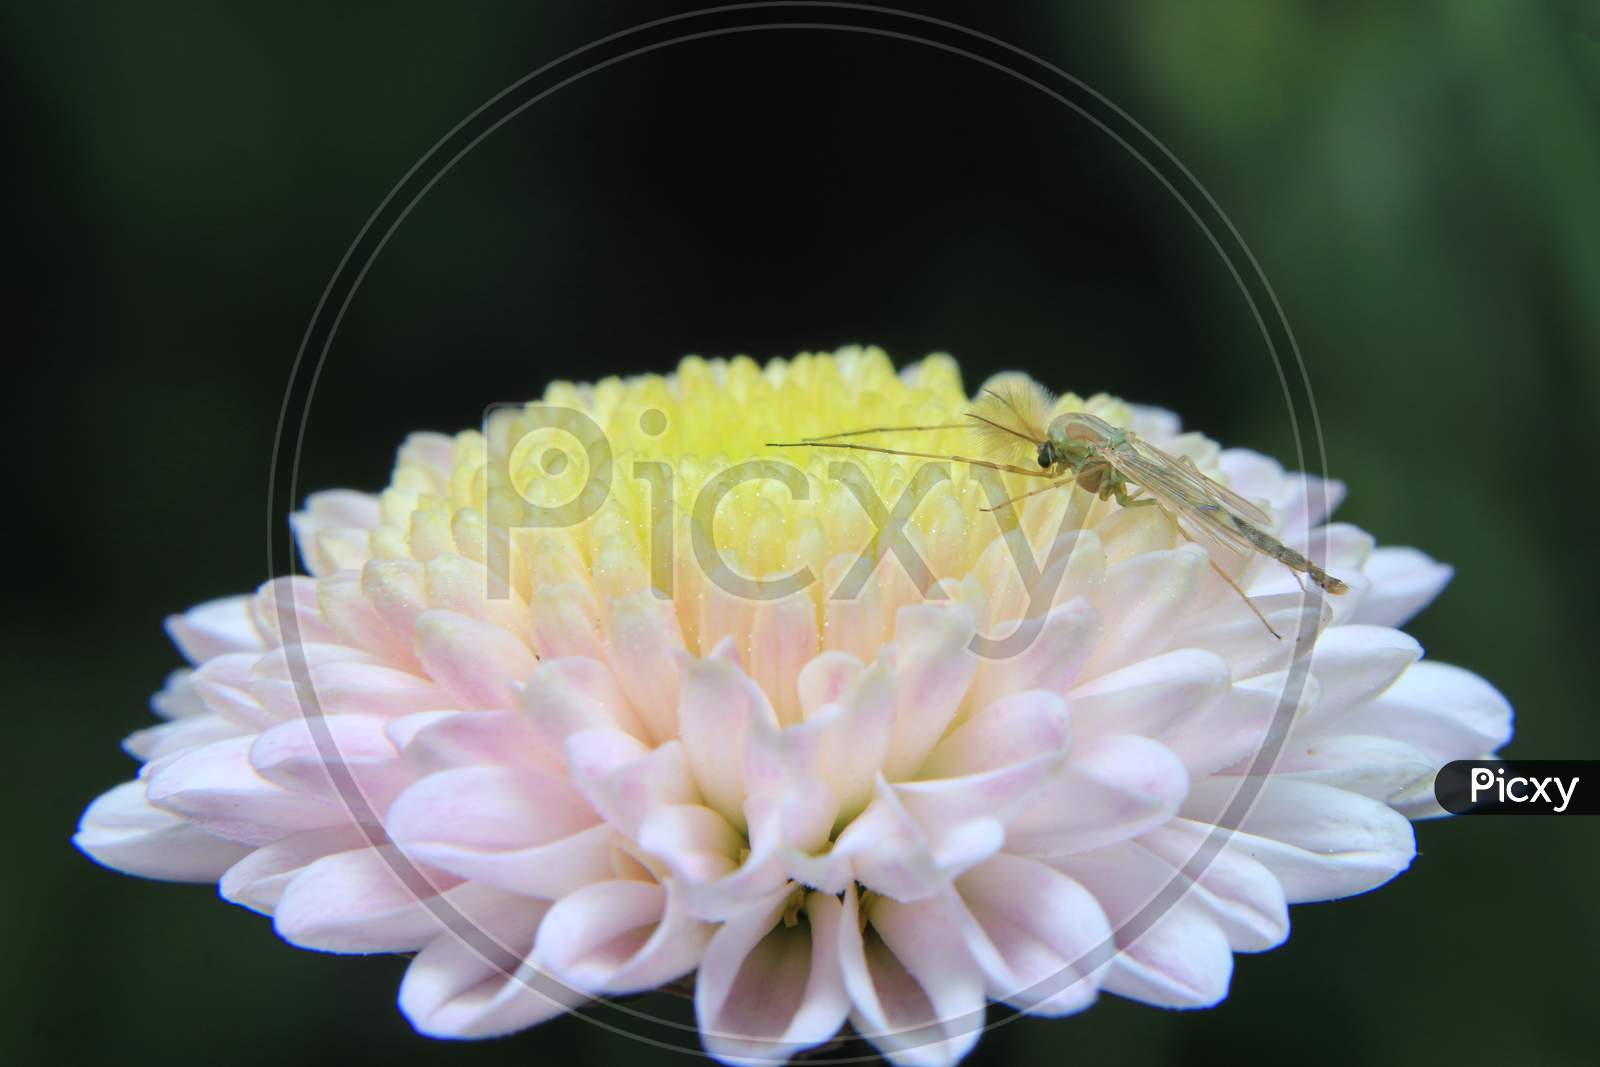 Mosquito On Flower